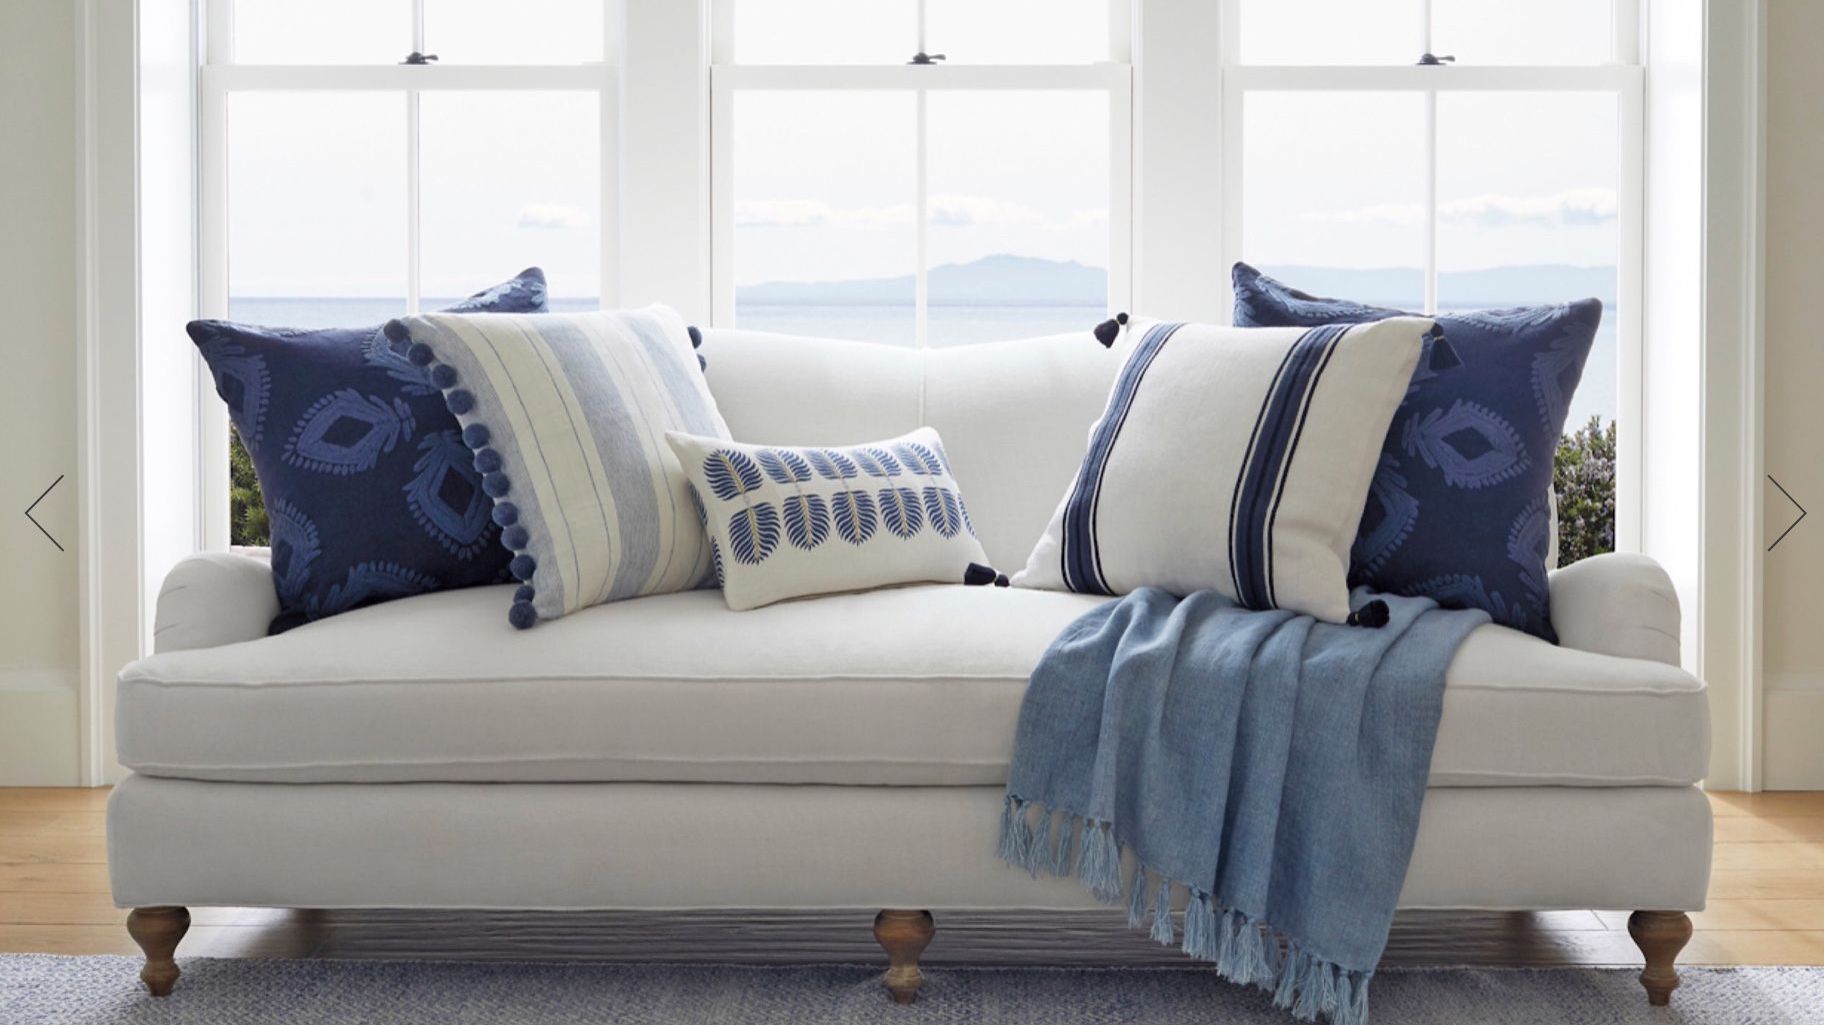 What Pillow Color Will Match A White Couch | Storables